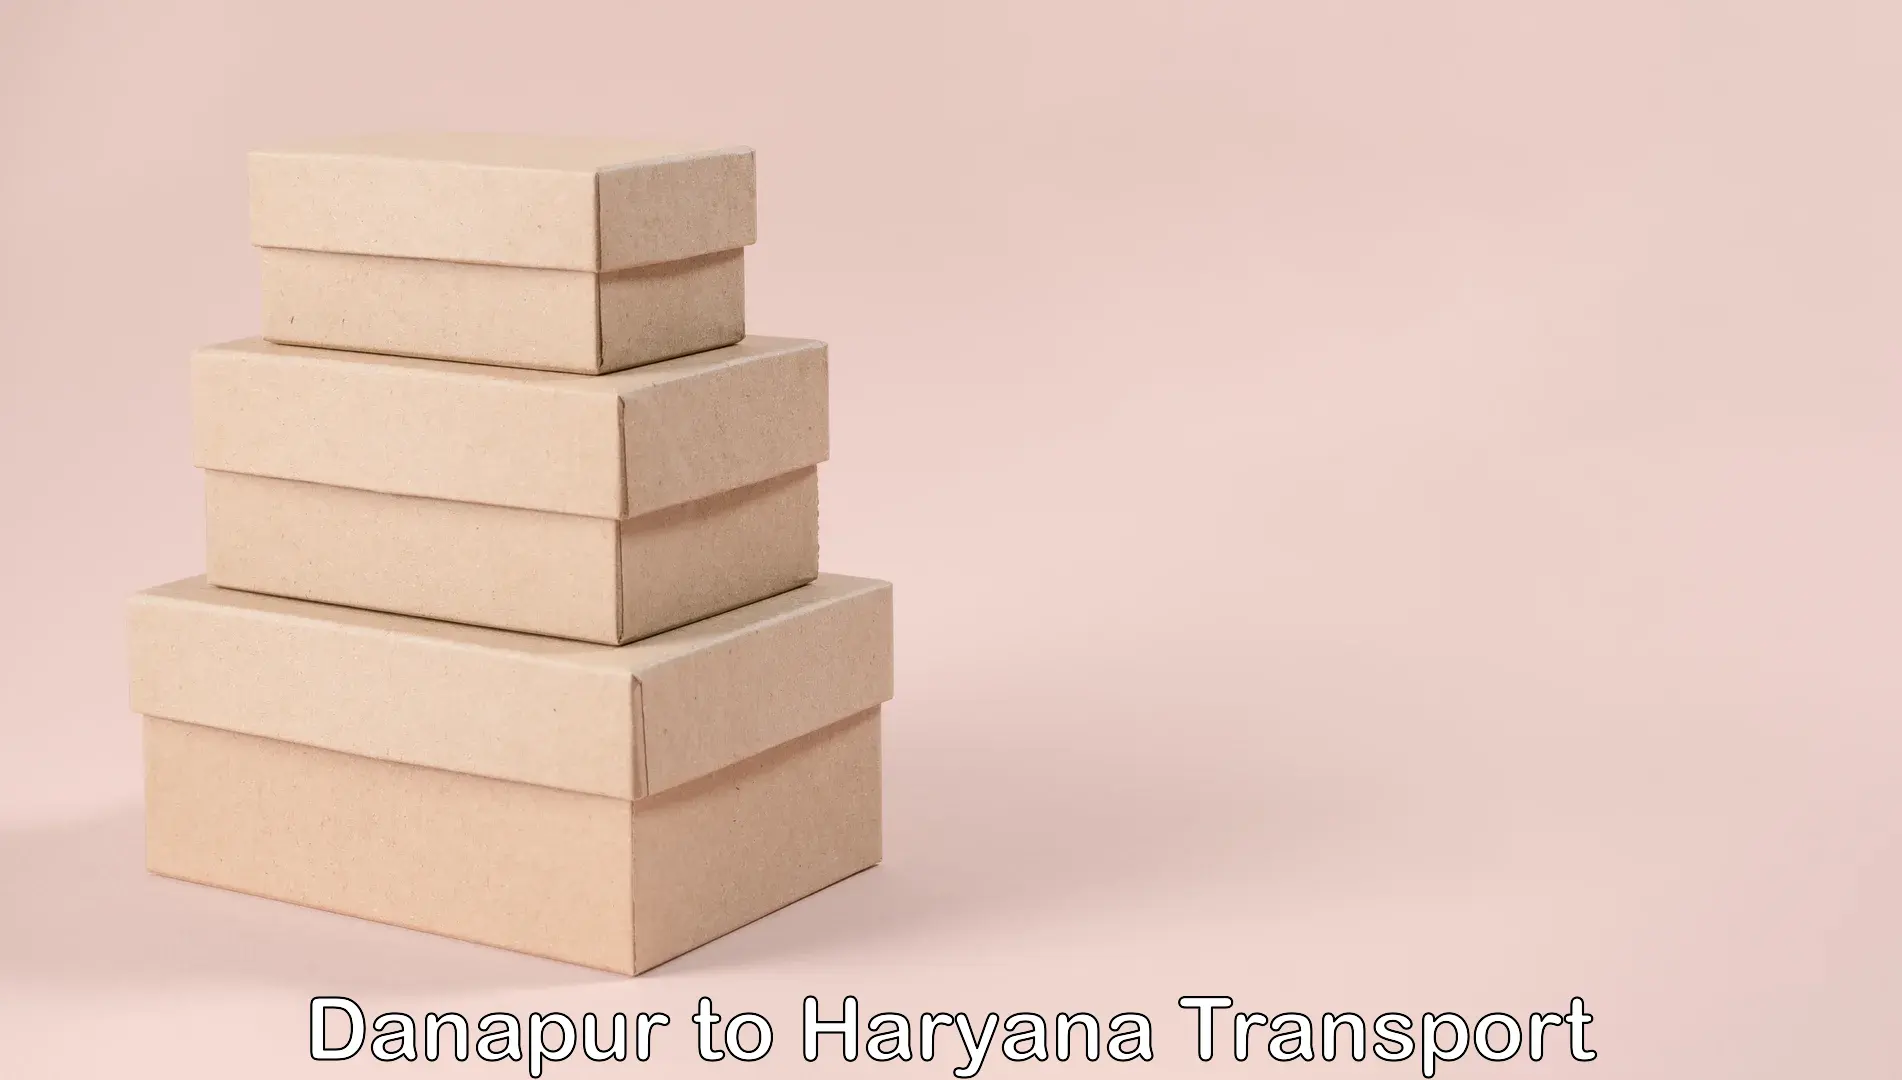 Container transport service in Danapur to Chaudhary Charan Singh Haryana Agricultural University Hisar